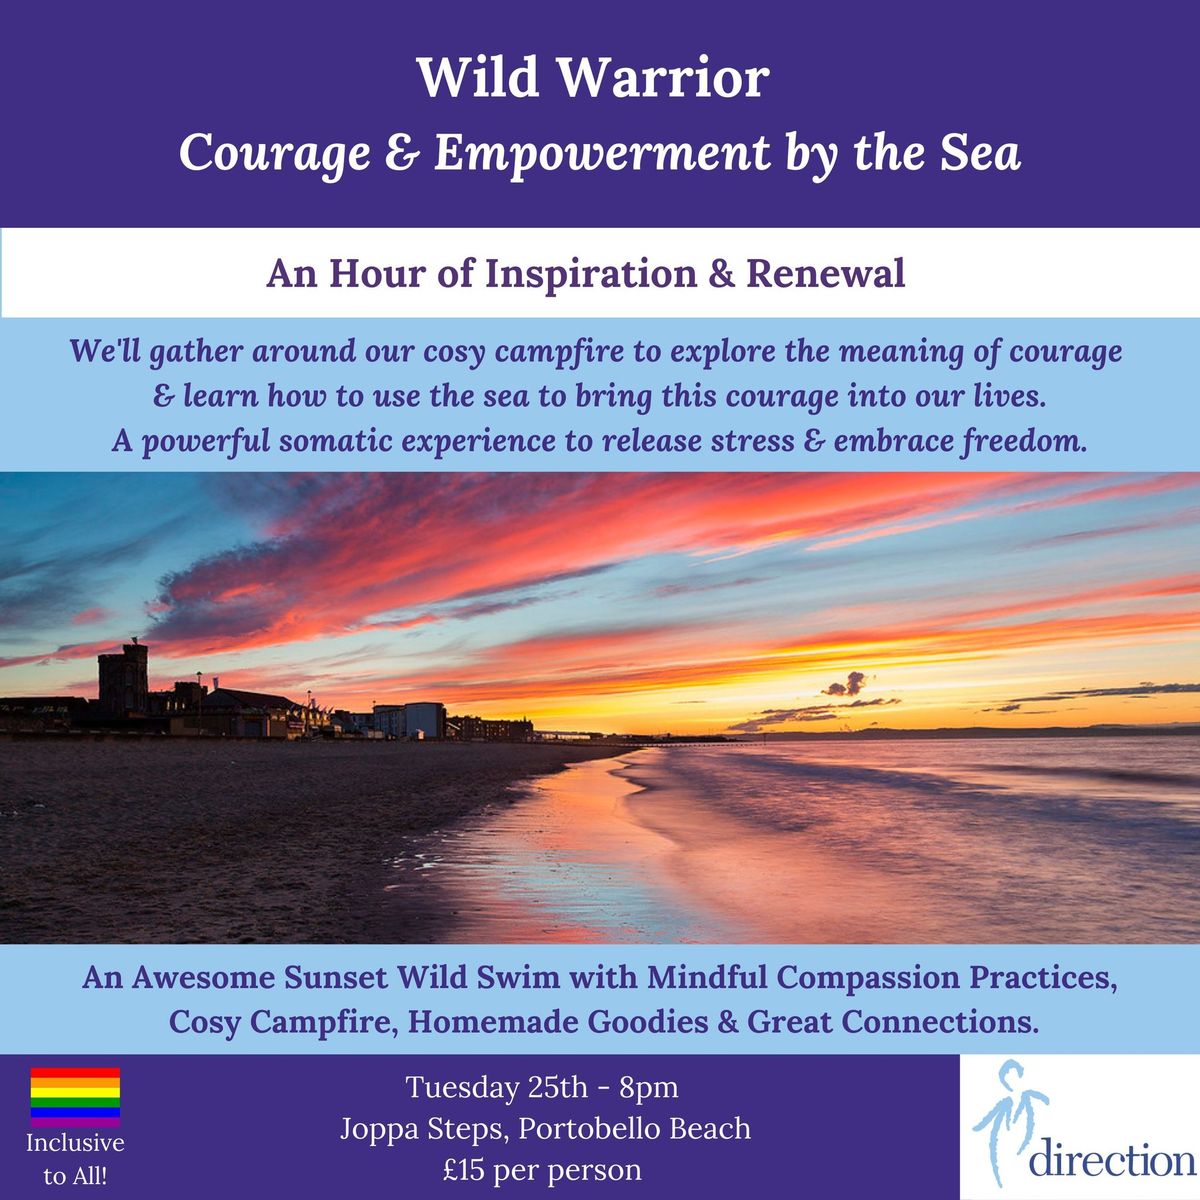 Wild Warrior - Courage & Empowerment by the Sea